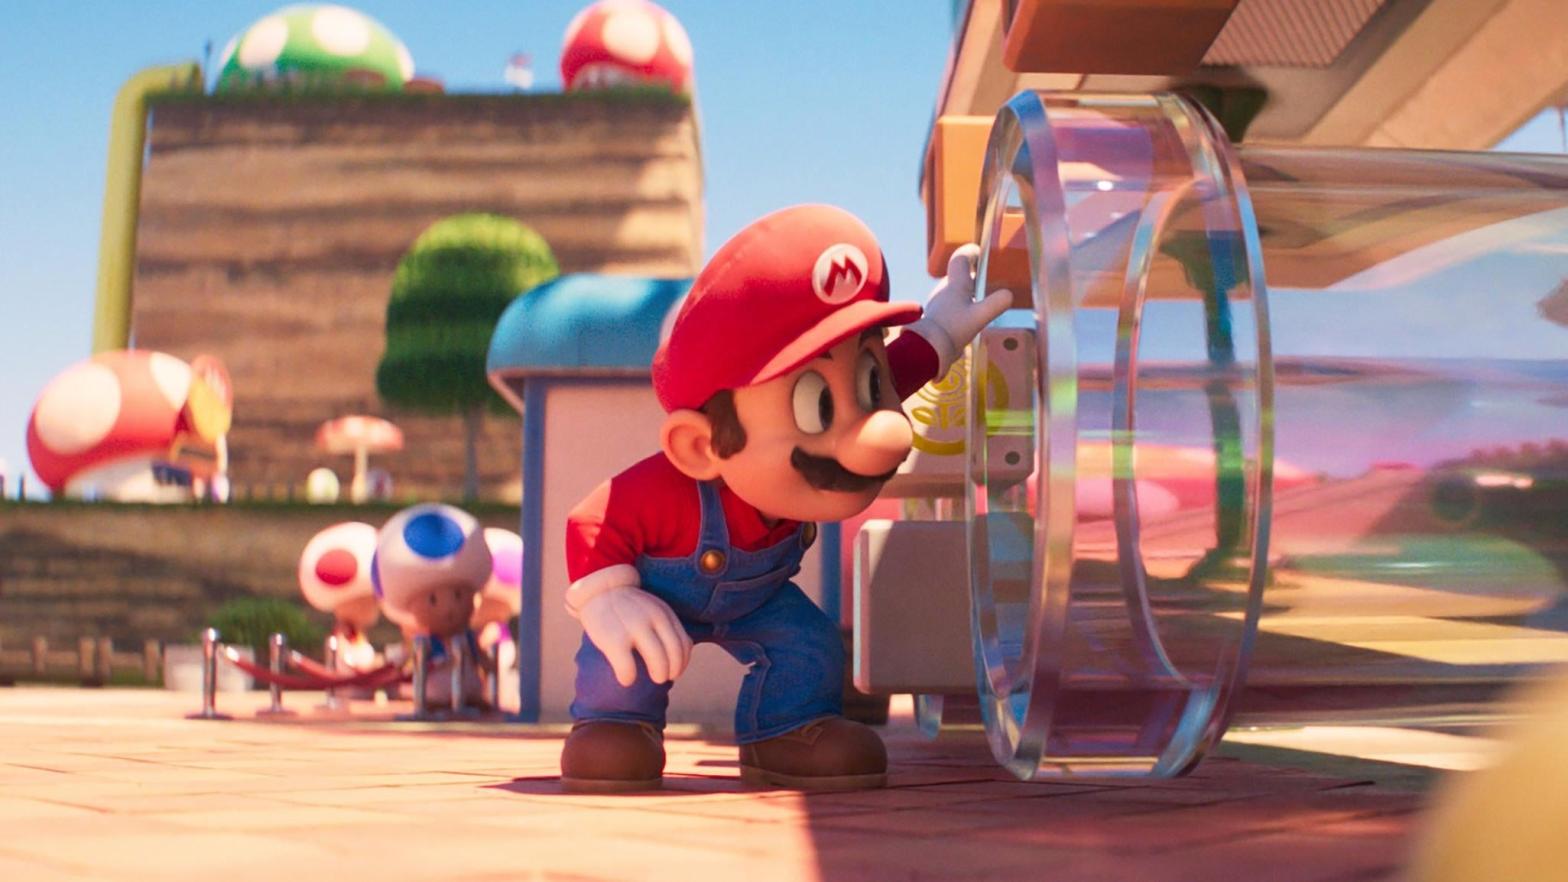 Mario looking in a pipe. (Image: Universal)